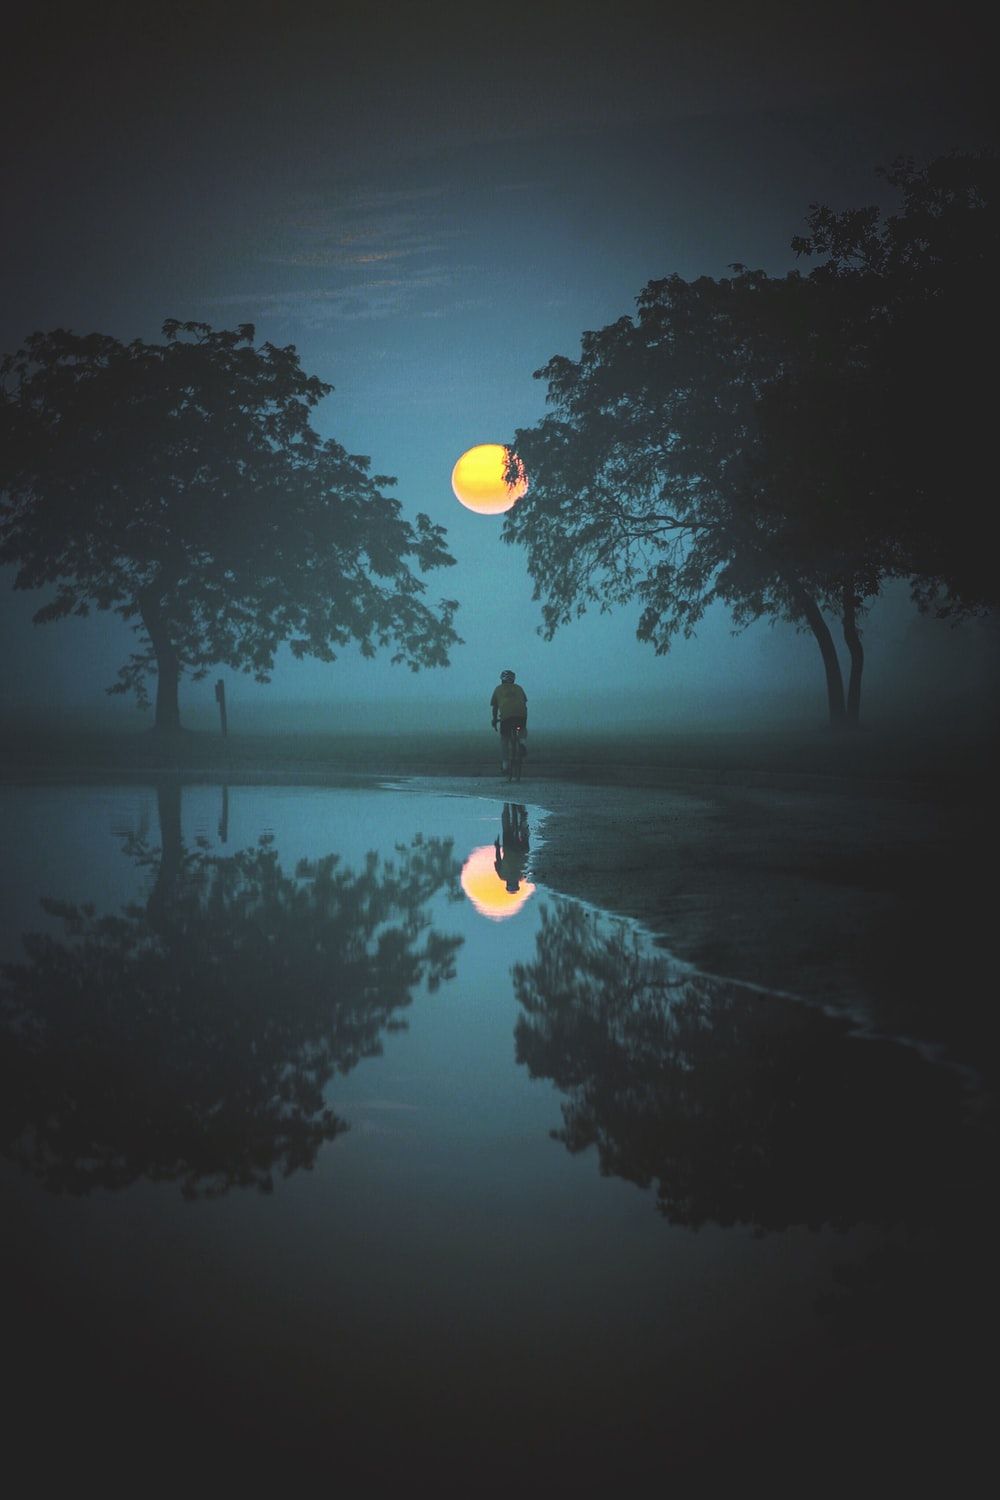 Moon Reflection Picture. Download Free Image